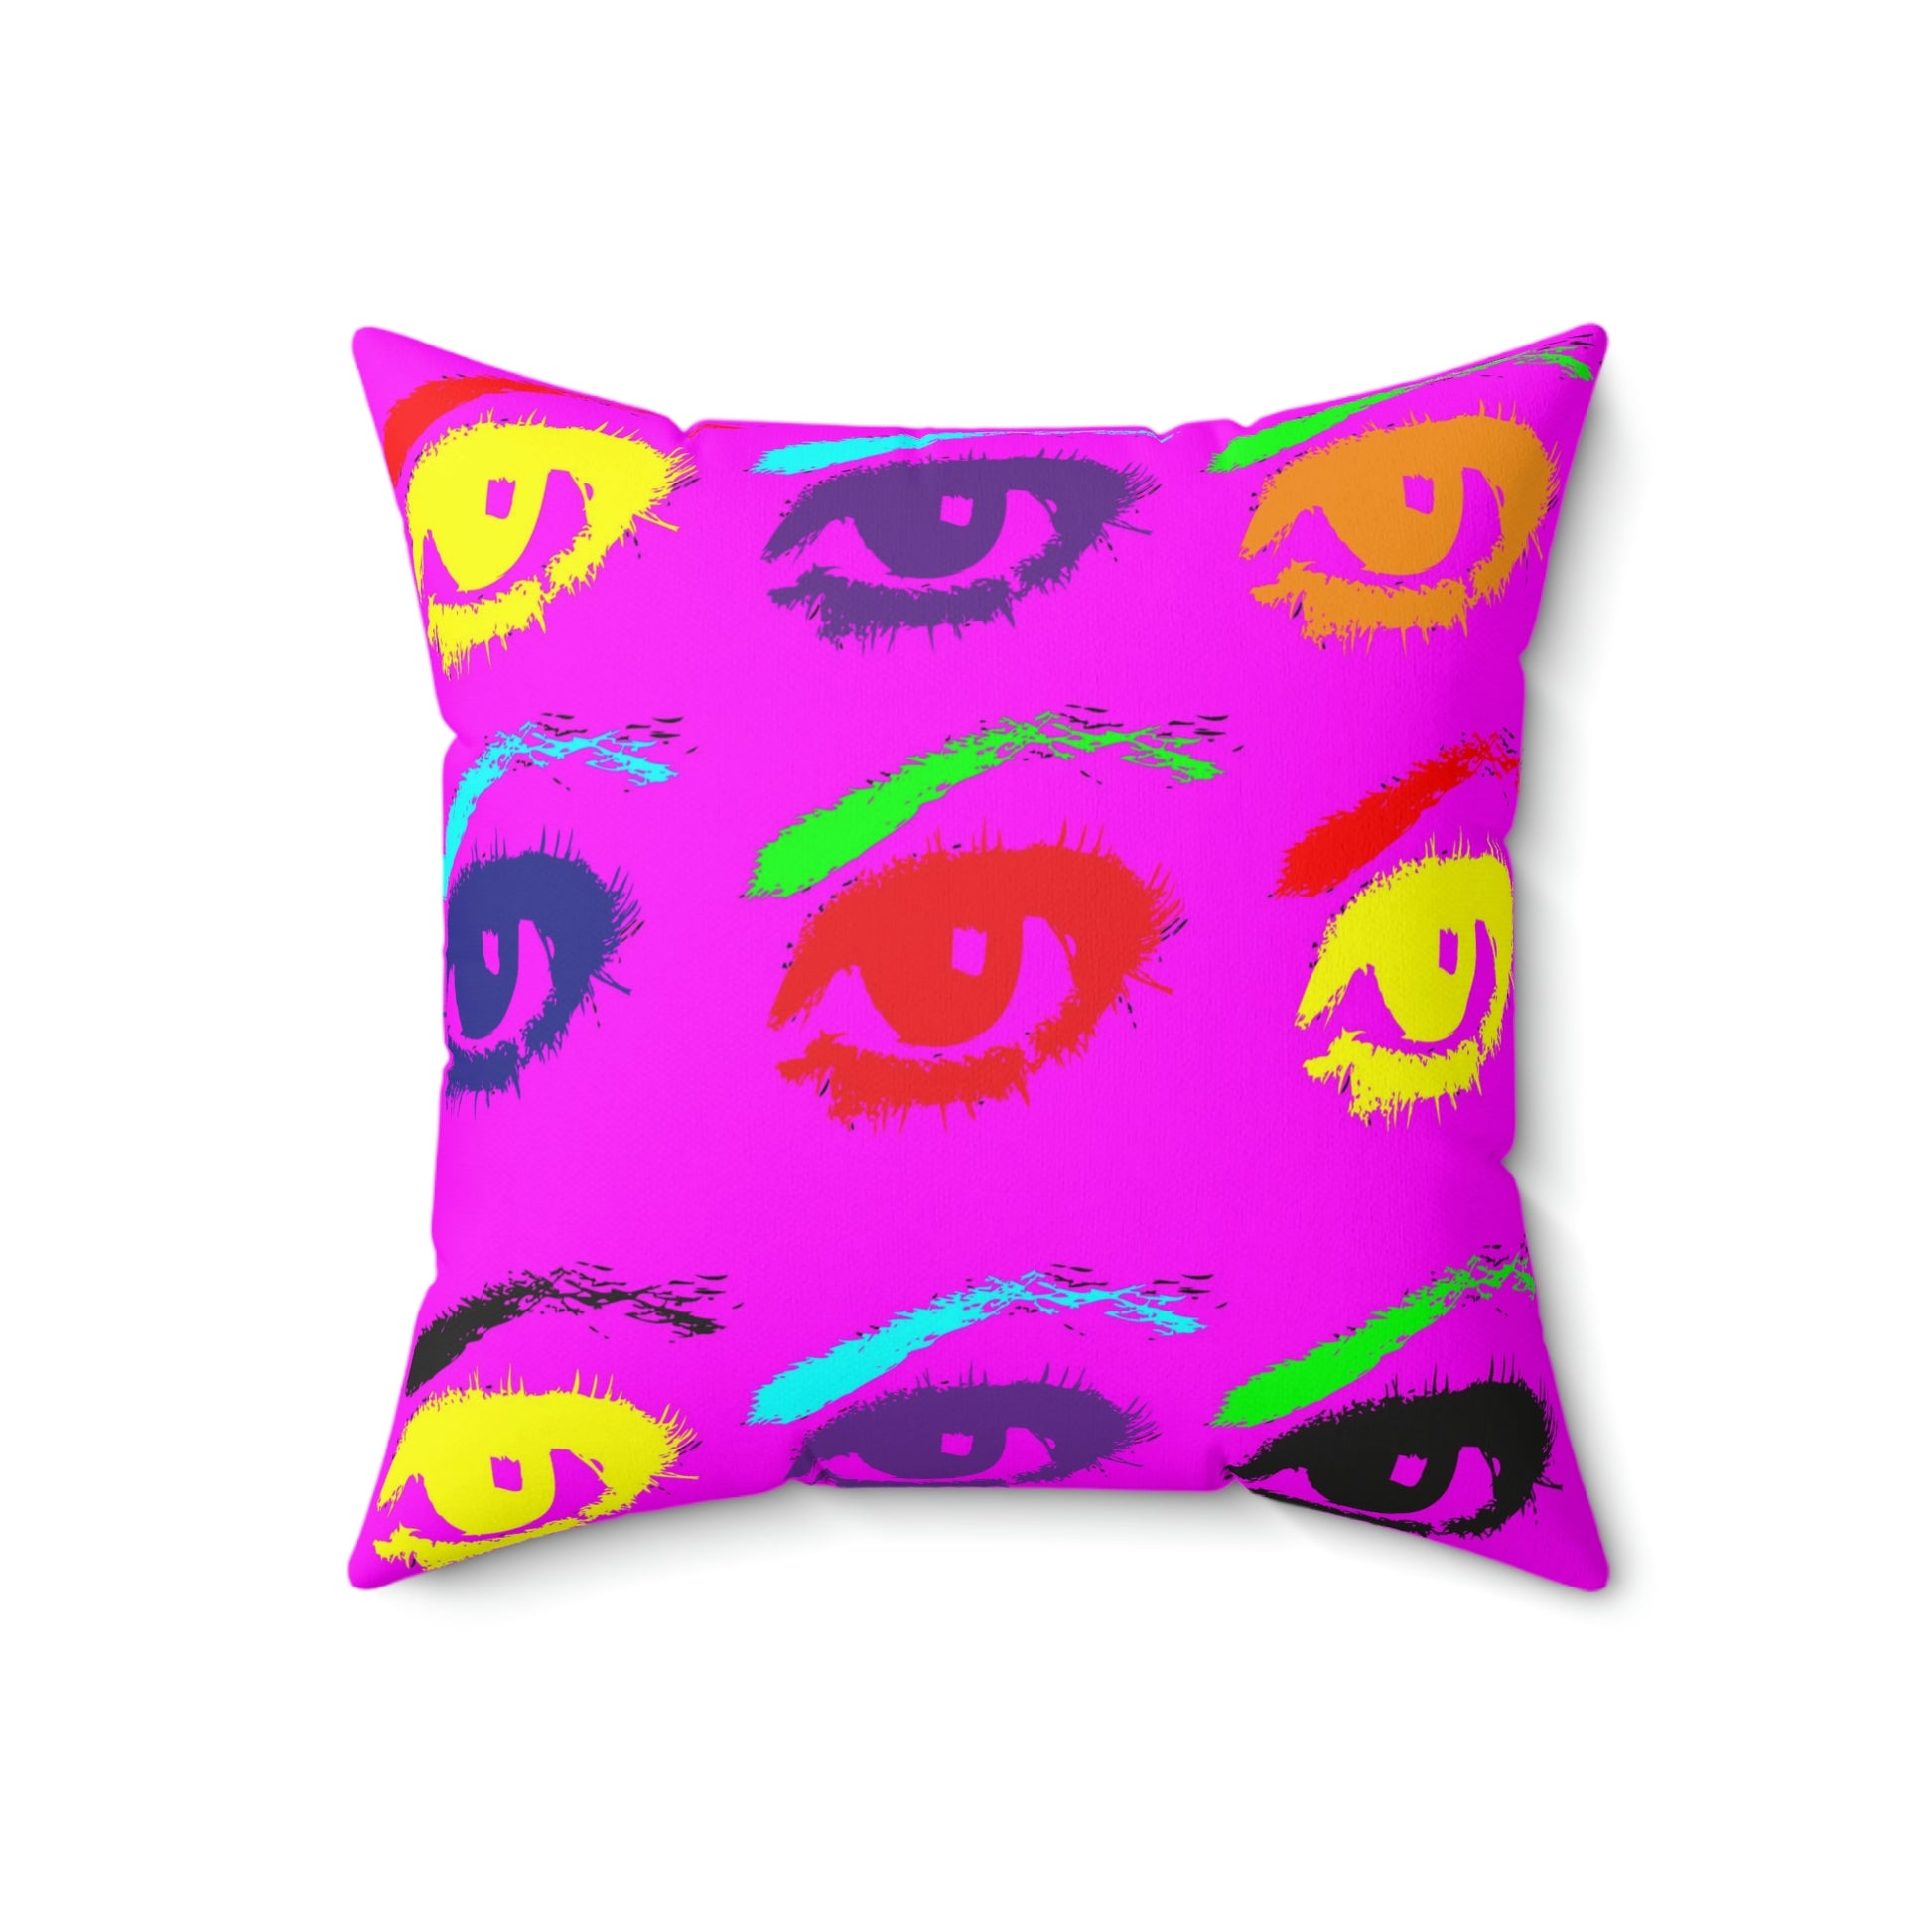 Geotrott Pink Warhol Style Eyes Art Multy Colored Eyes Grid Spun Polyester Square Pillow